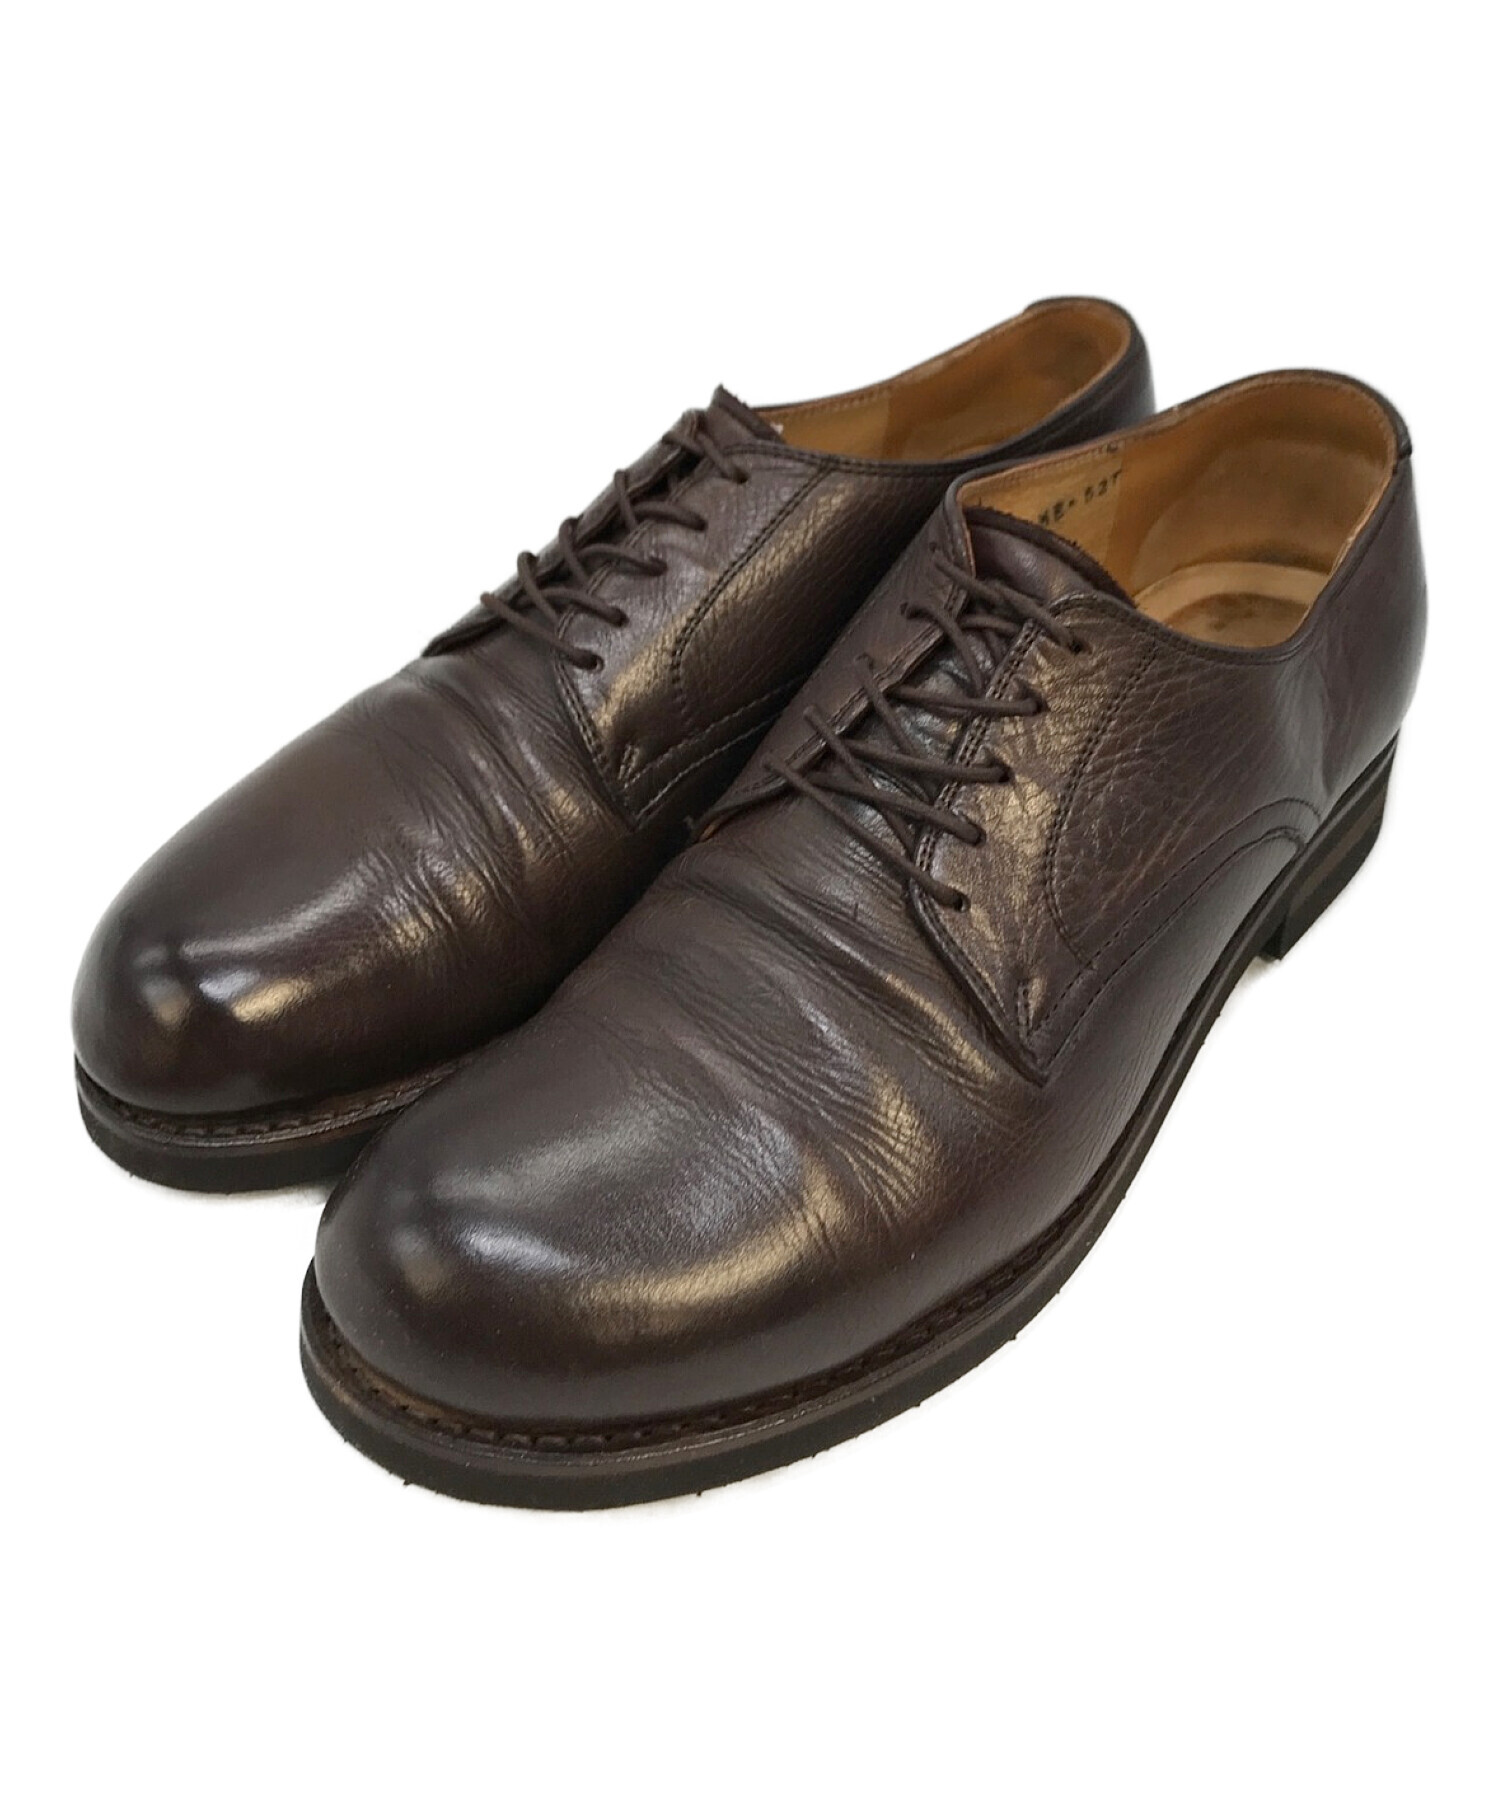 MR.OLIVE (ミスターオリーブ) WATER PROOF SHIRINK LEATHER / PLAIN TOE OXFORD SHOES  ブラウン サイズ:7 1/2